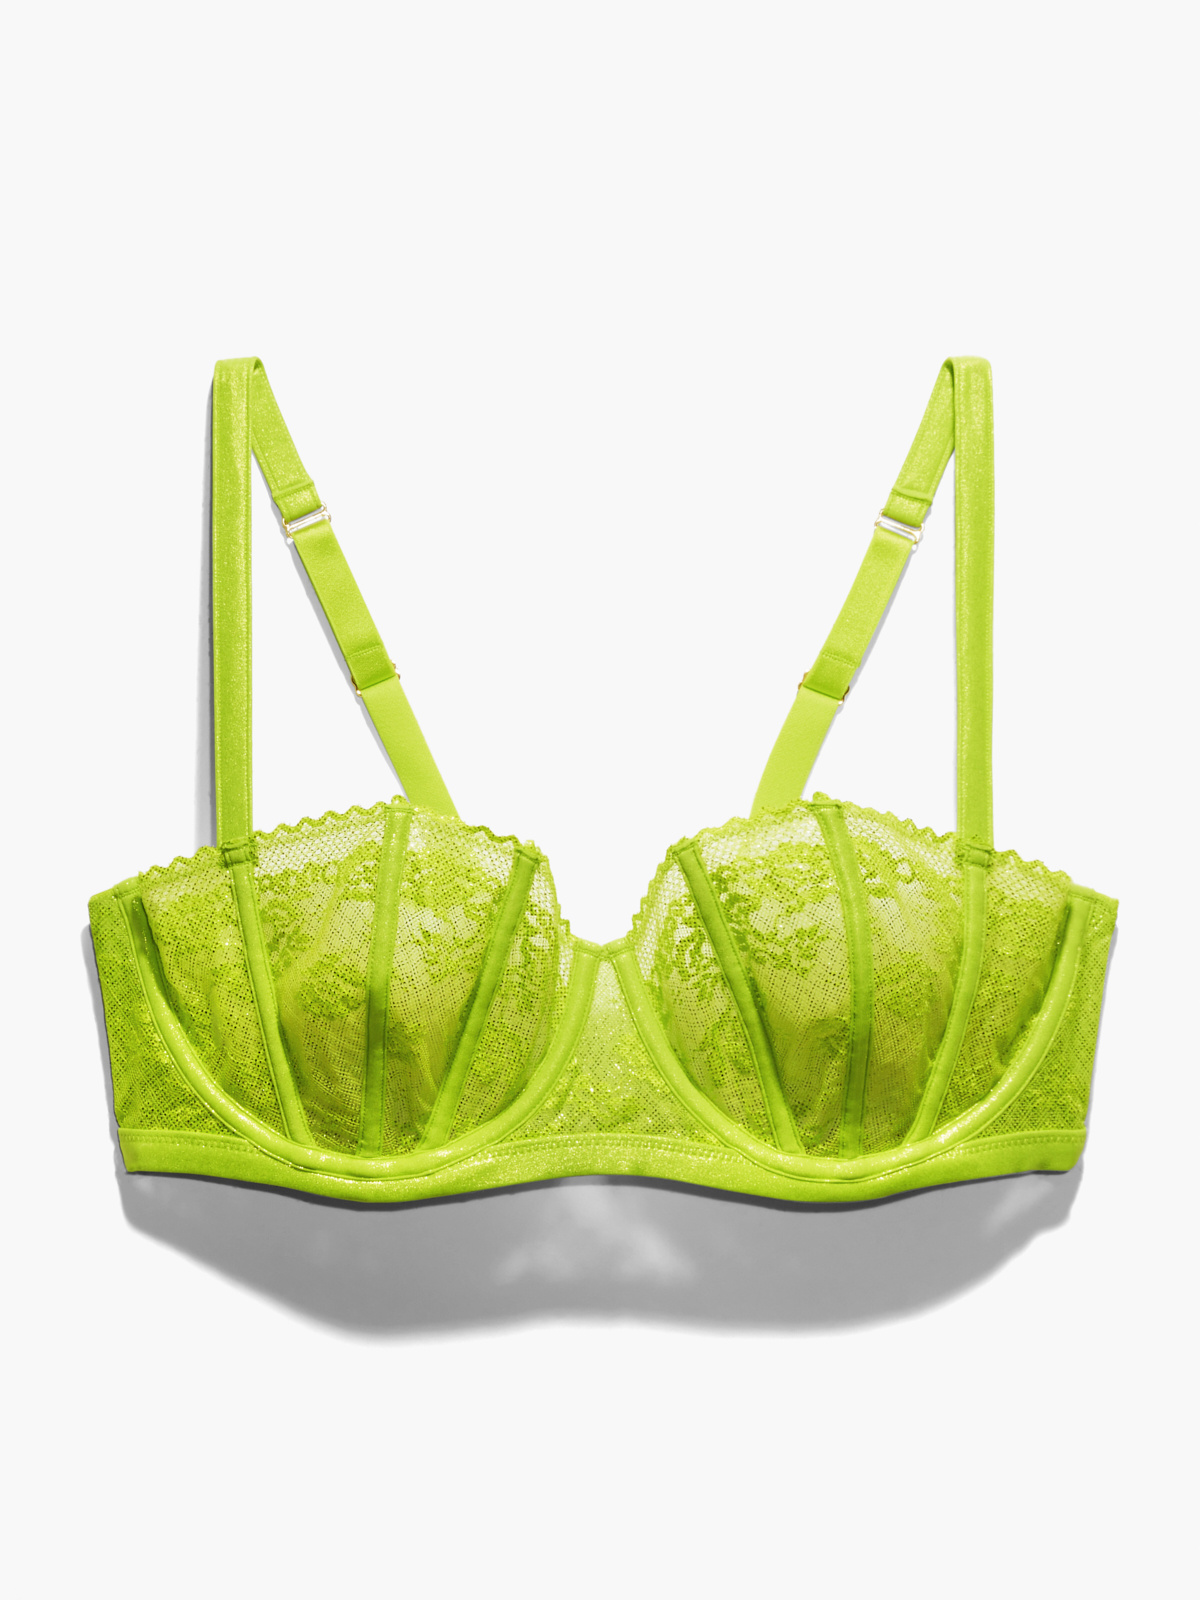 Cacique Modern Lace Covered Green Balconette Lightly Lined Bra 42G Size  undefined - $39 - From Fried